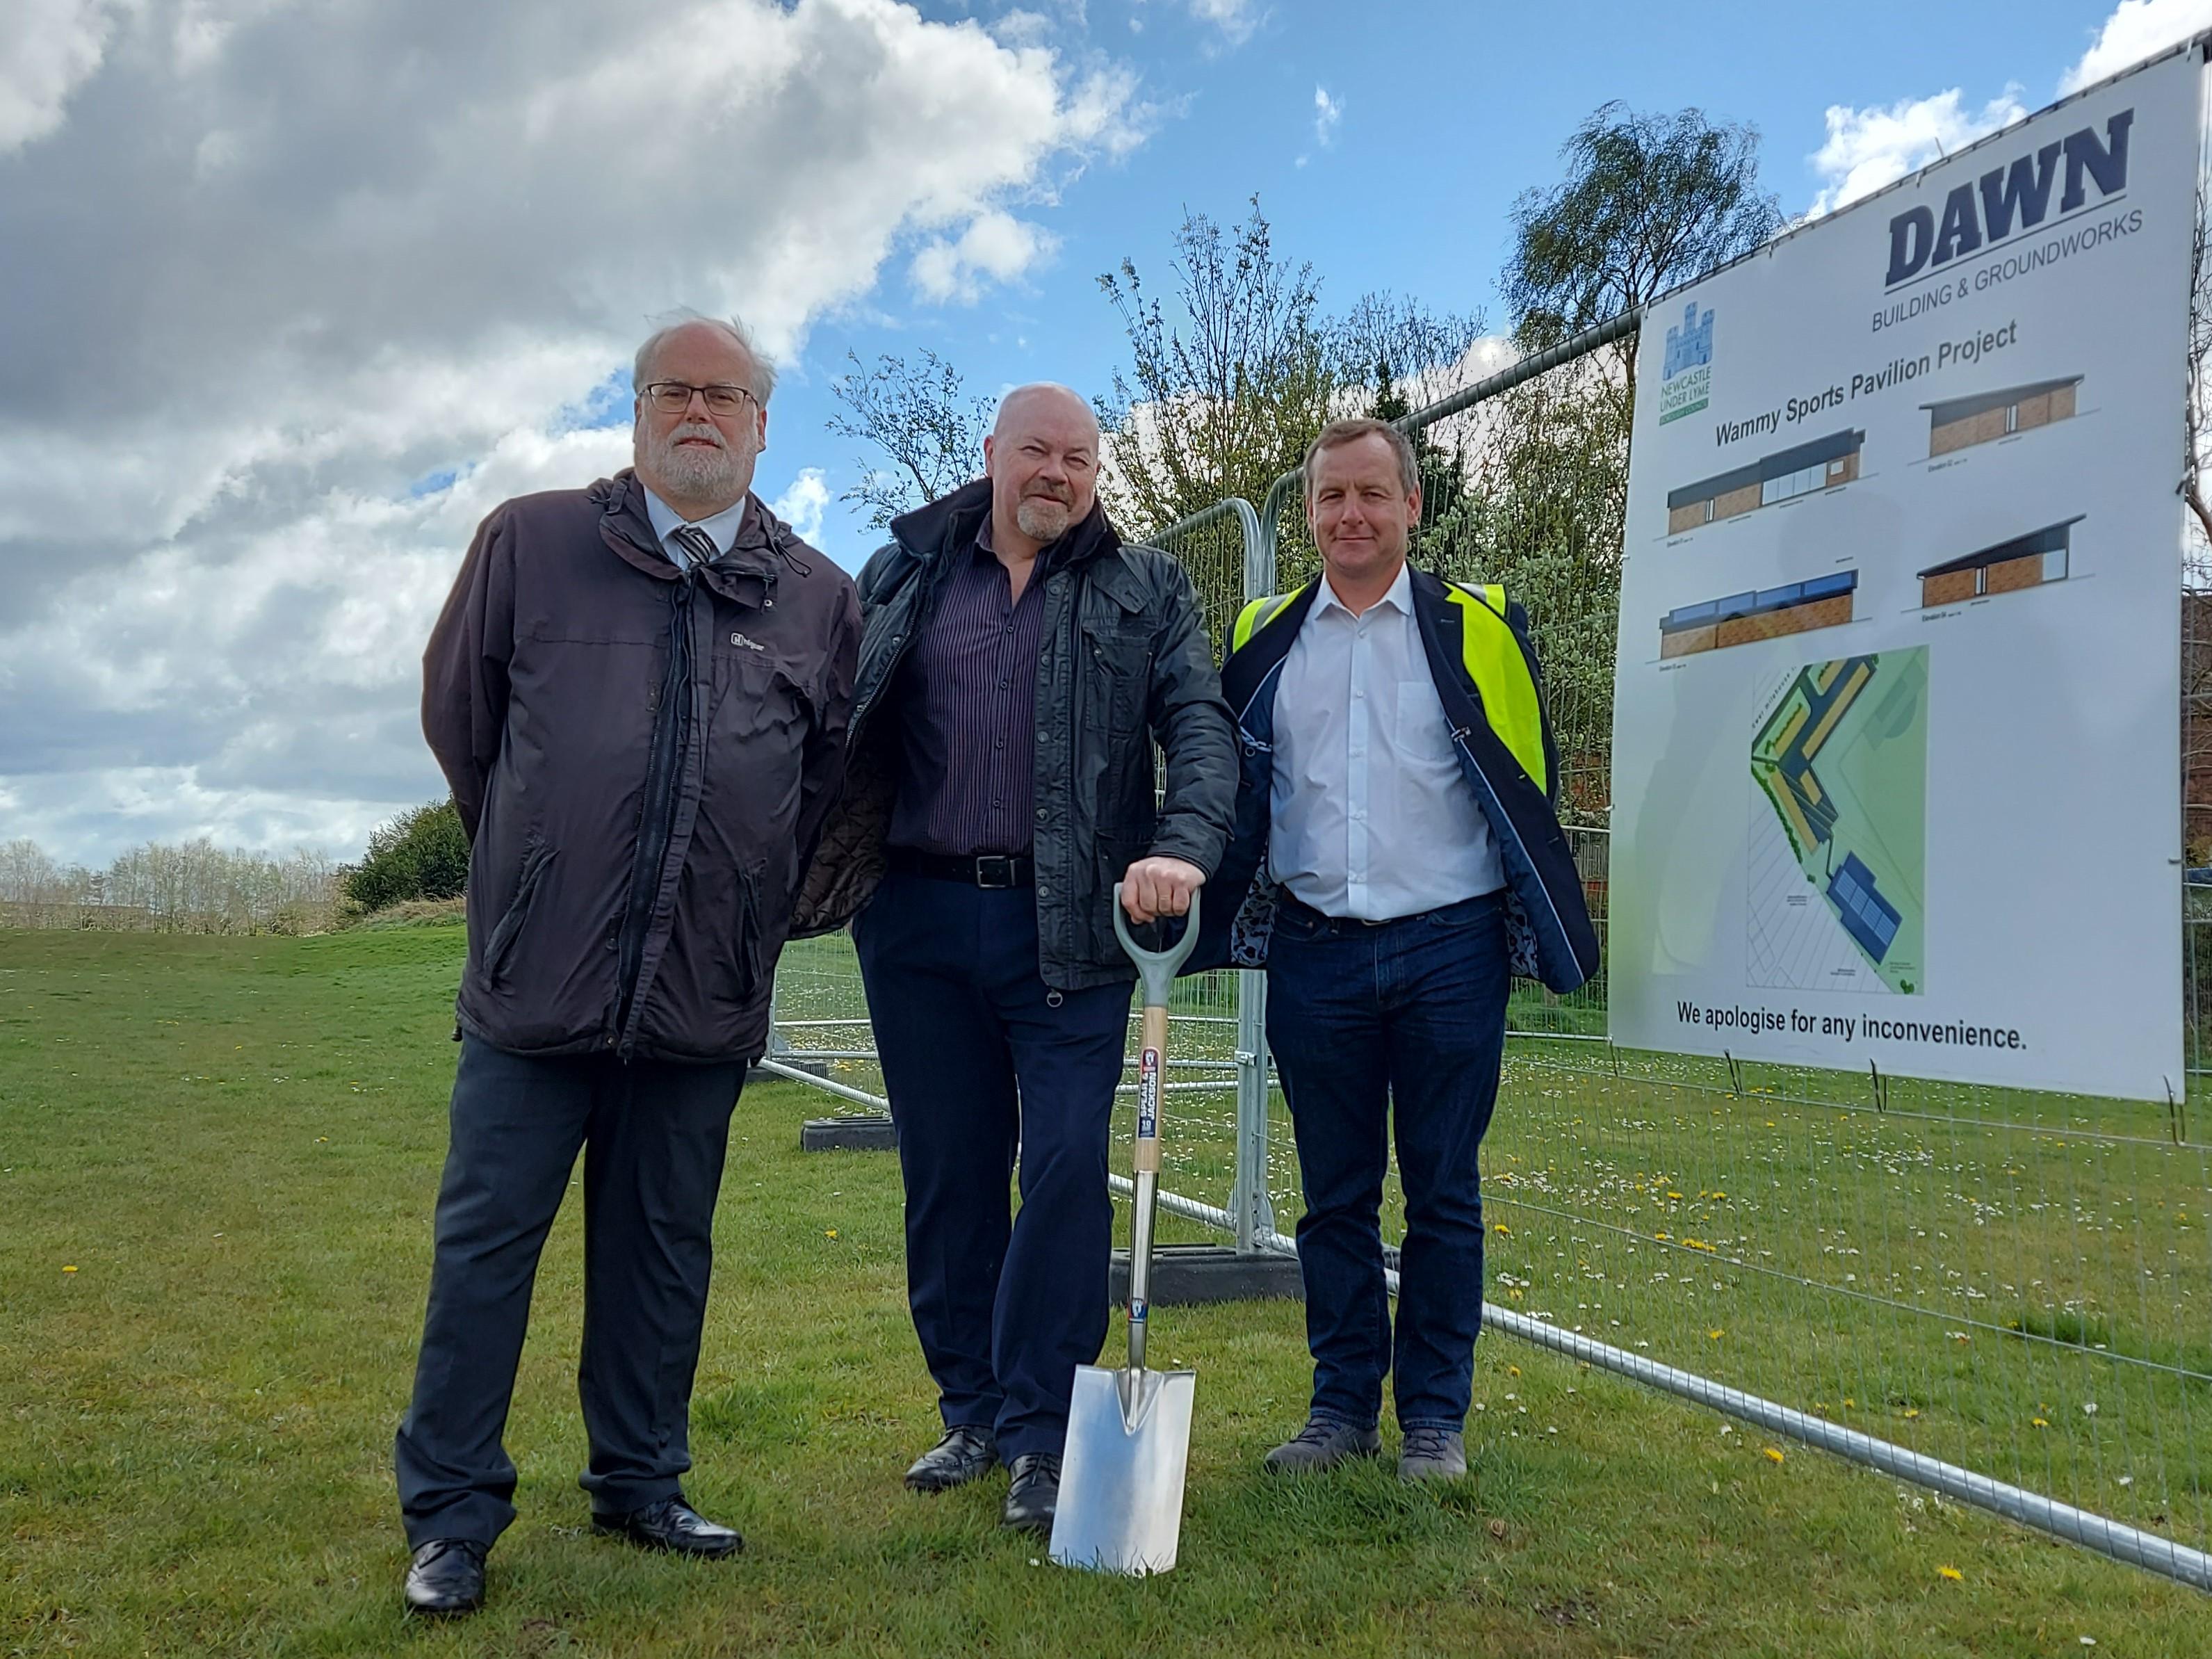 Footballers can soon enjoy a more comfortable playing experience now that building has started to create accessible changing rooms on a popular sports field in Knutton.